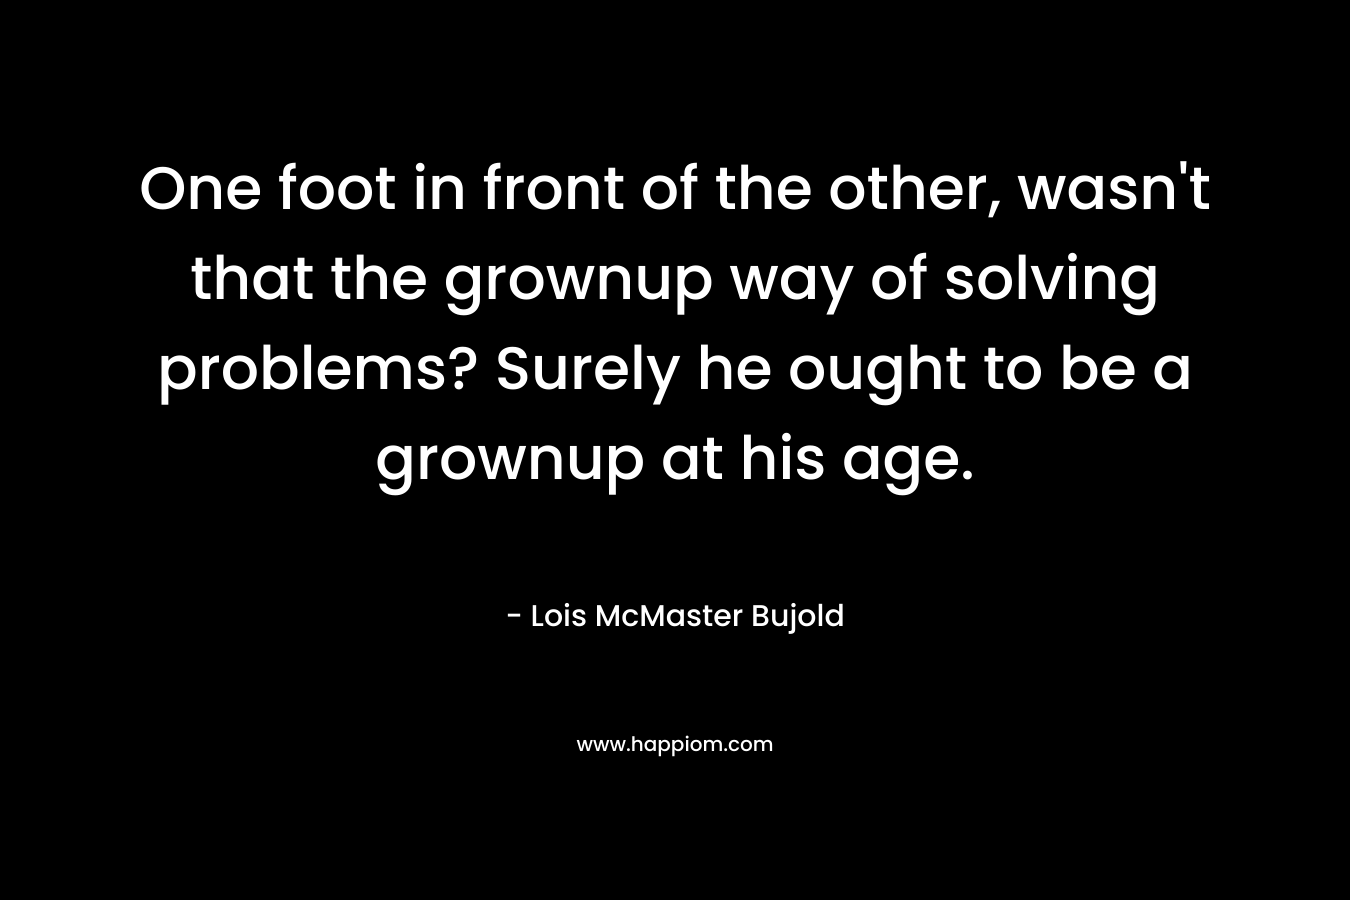 One foot in front of the other, wasn’t that the grownup way of solving problems? Surely he ought to be a grownup at his age. – Lois McMaster Bujold